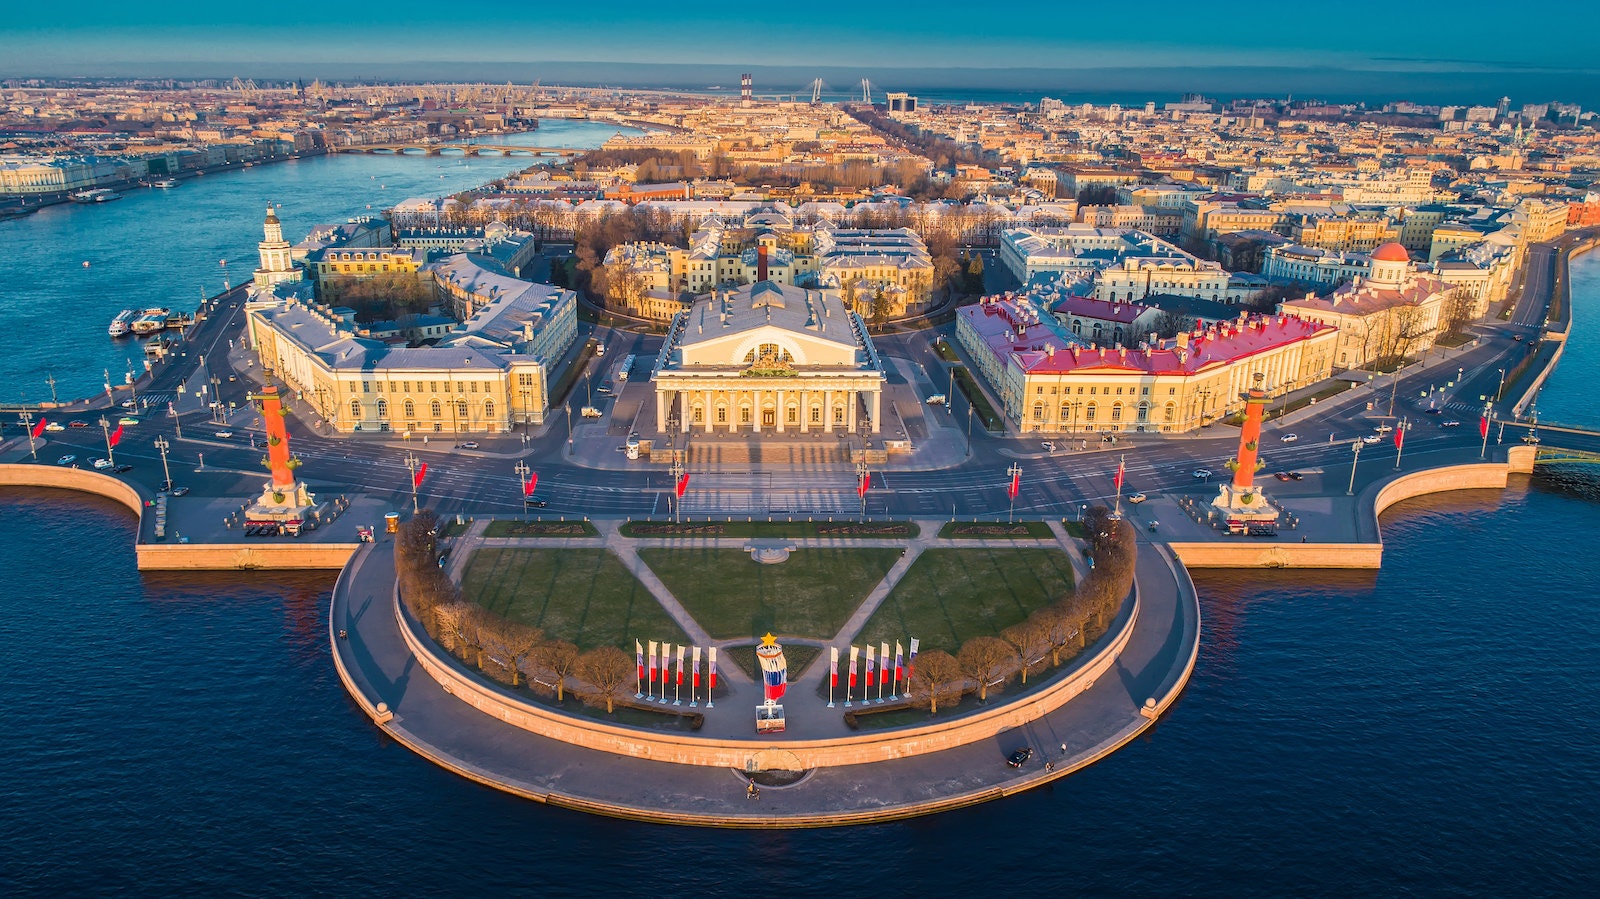 Vasilyevsky Island in St. Petersburg, featuring the Neva Rive, a summer view of Petersburg, Exchange, Rastral columns, The Cabinet of Curiosities, and The Palace Bridge.